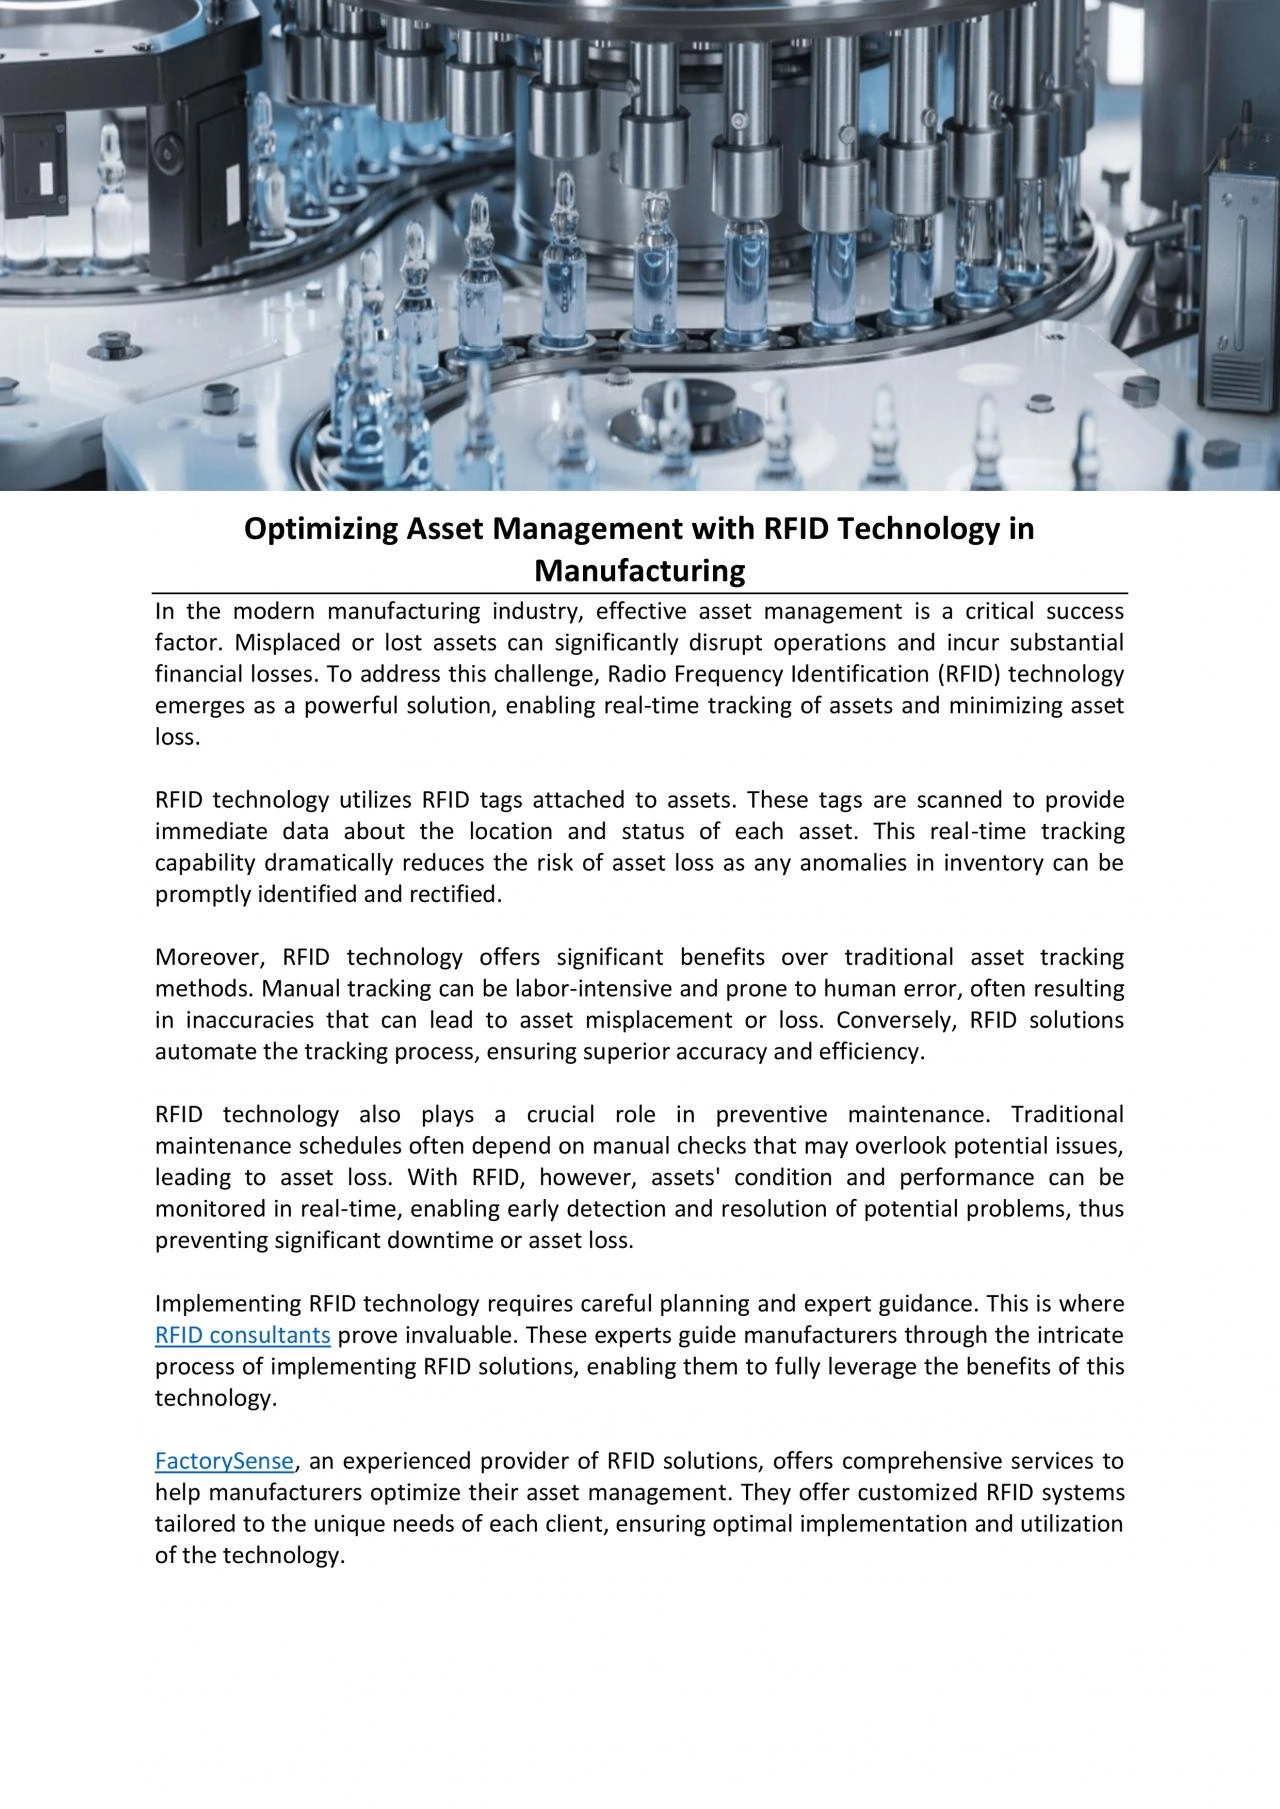 Optimizing Asset Management with RFID Technology in Manufacturing